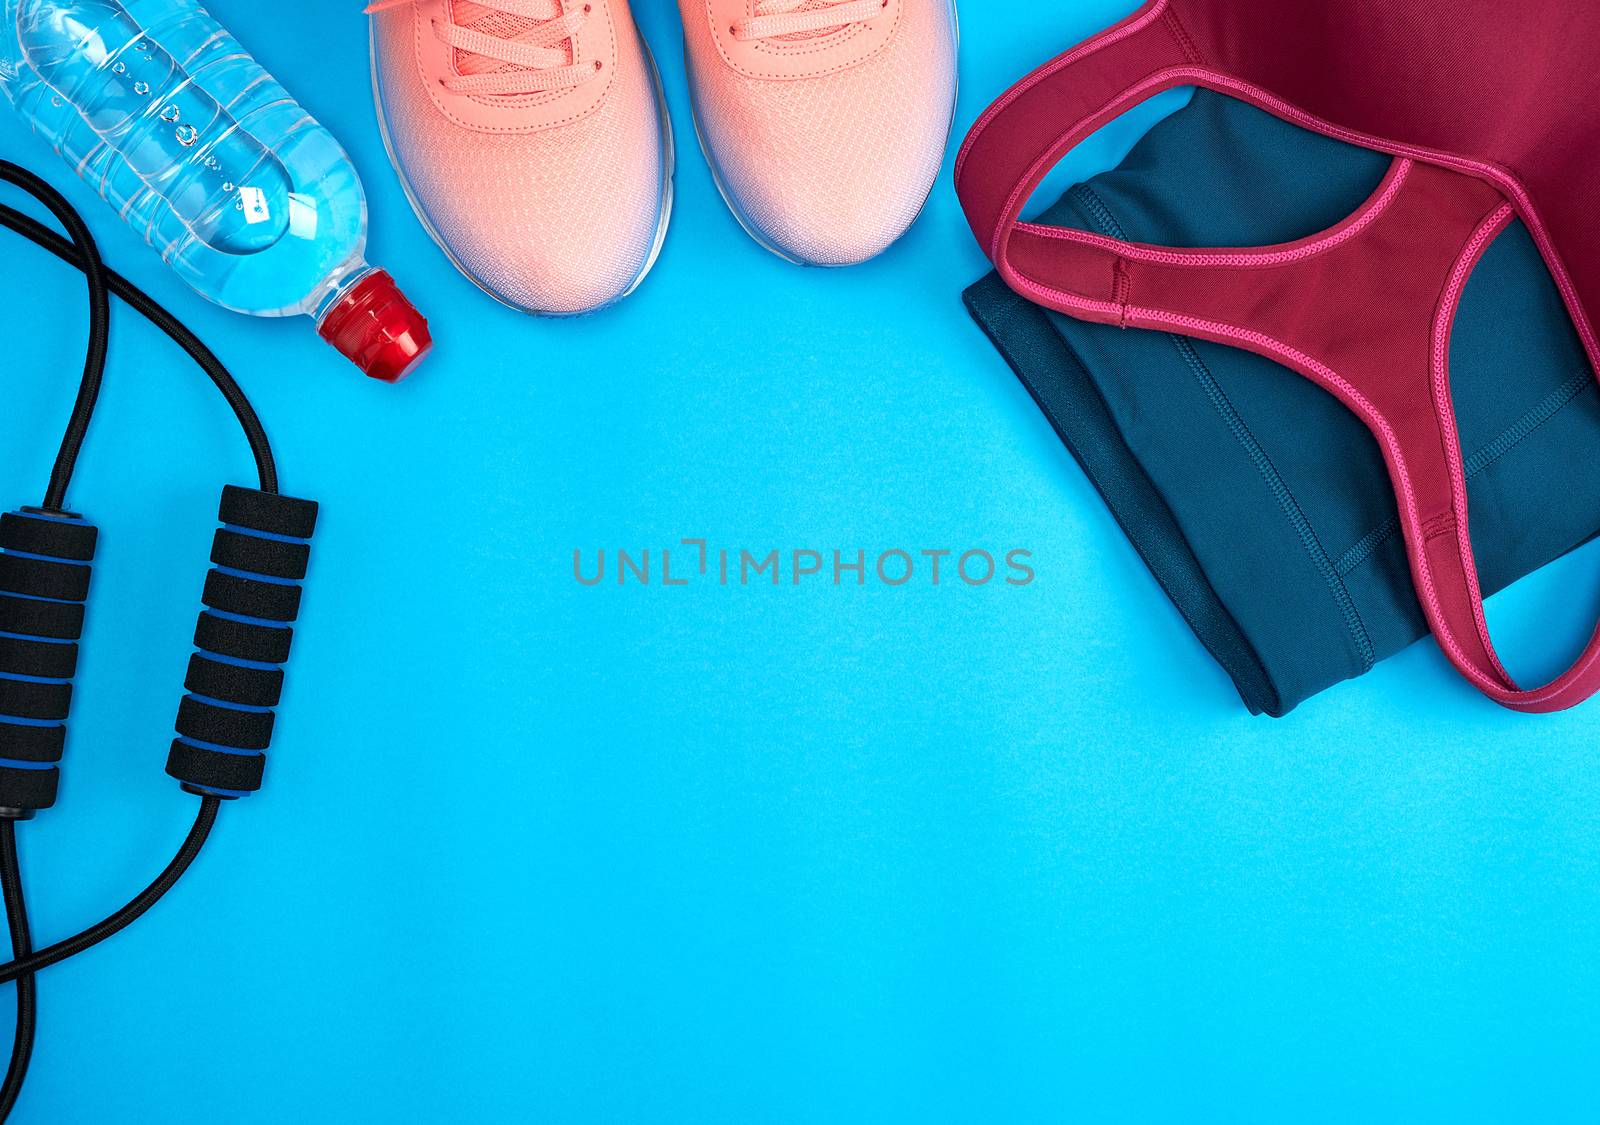 women's sportswear for active sports and pink sneakers on a blue background, top view